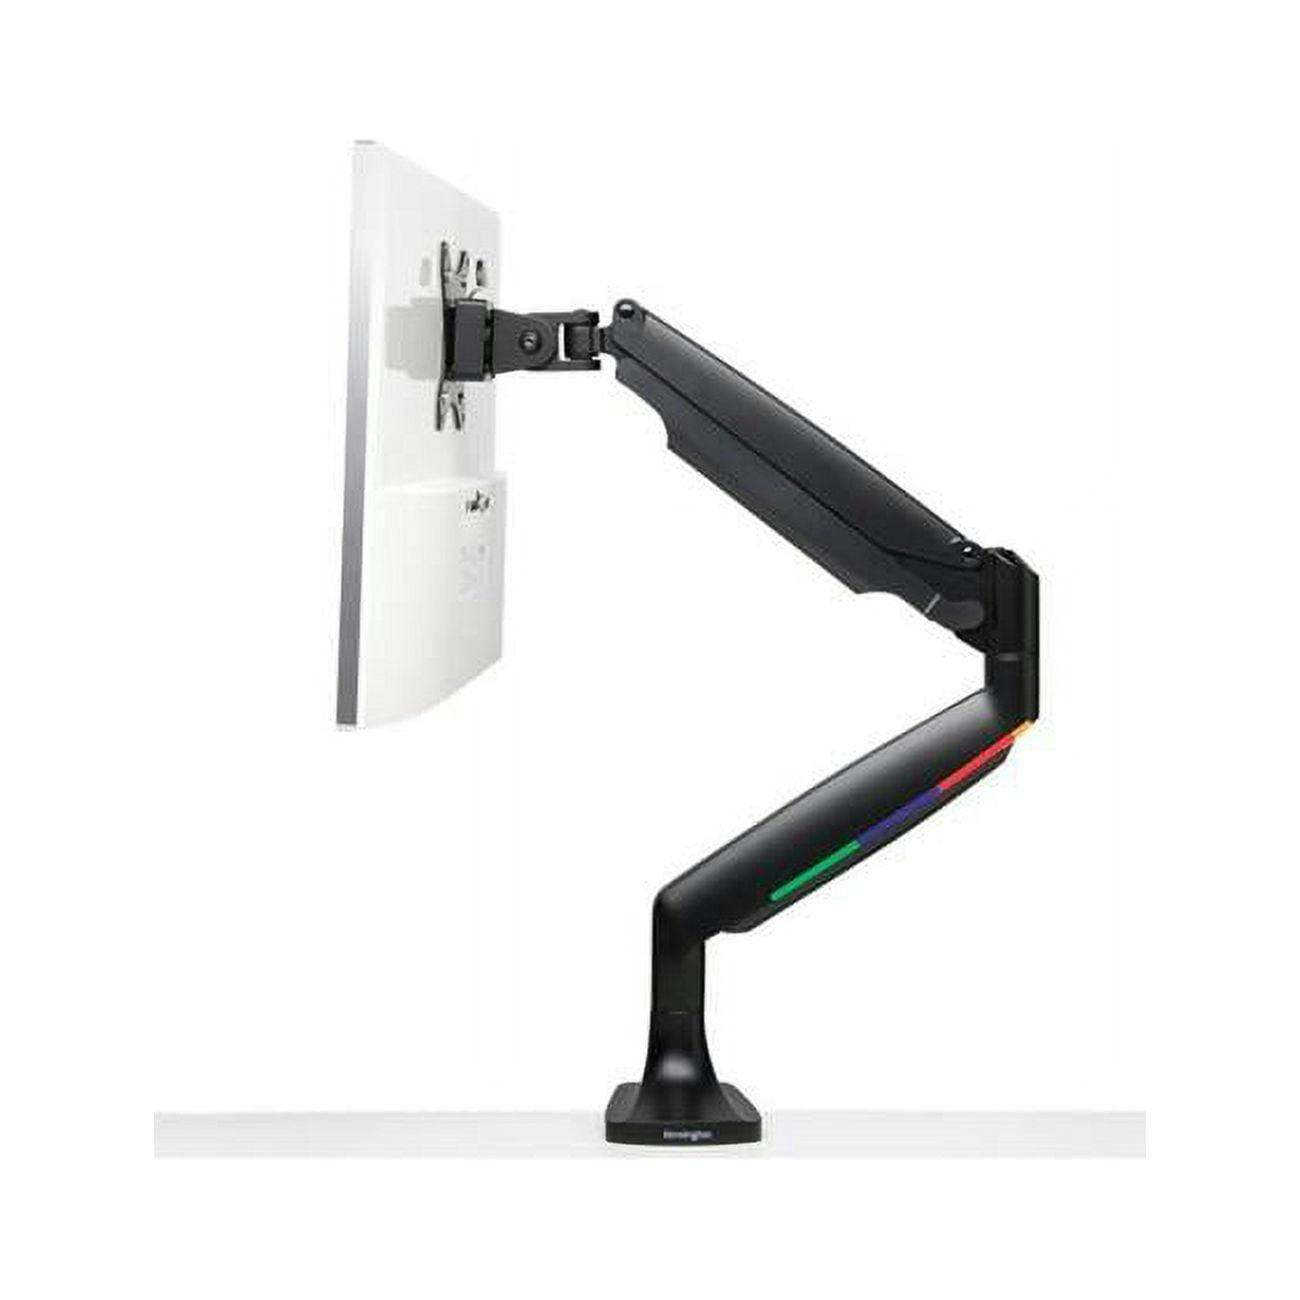 OneTouch Sleek Black Height Adjustable Monitor Arm with Cable Management